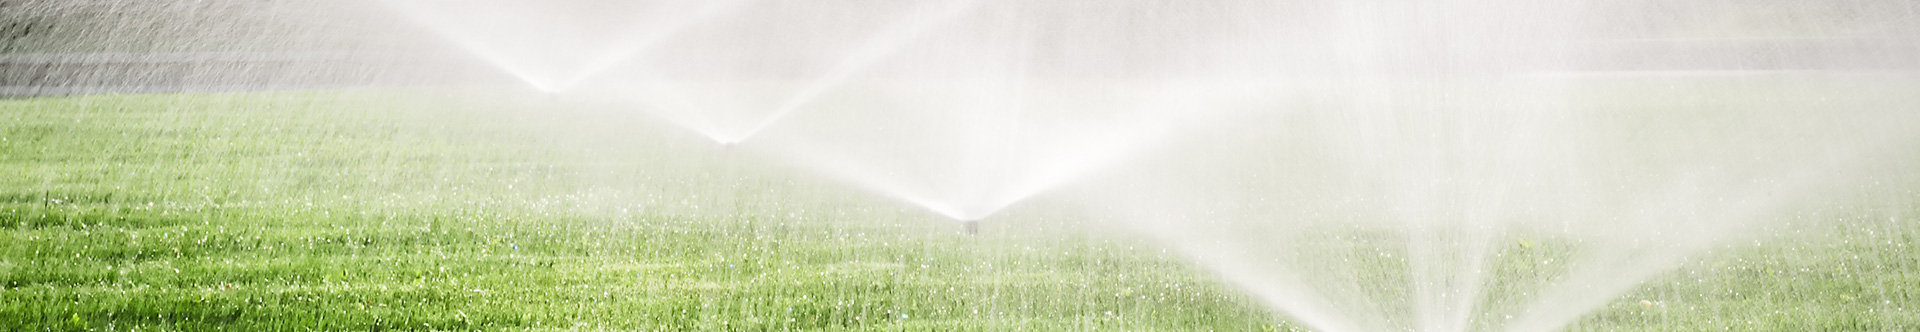 twin-cities-commercial-lawn-irrigation-services.jpg